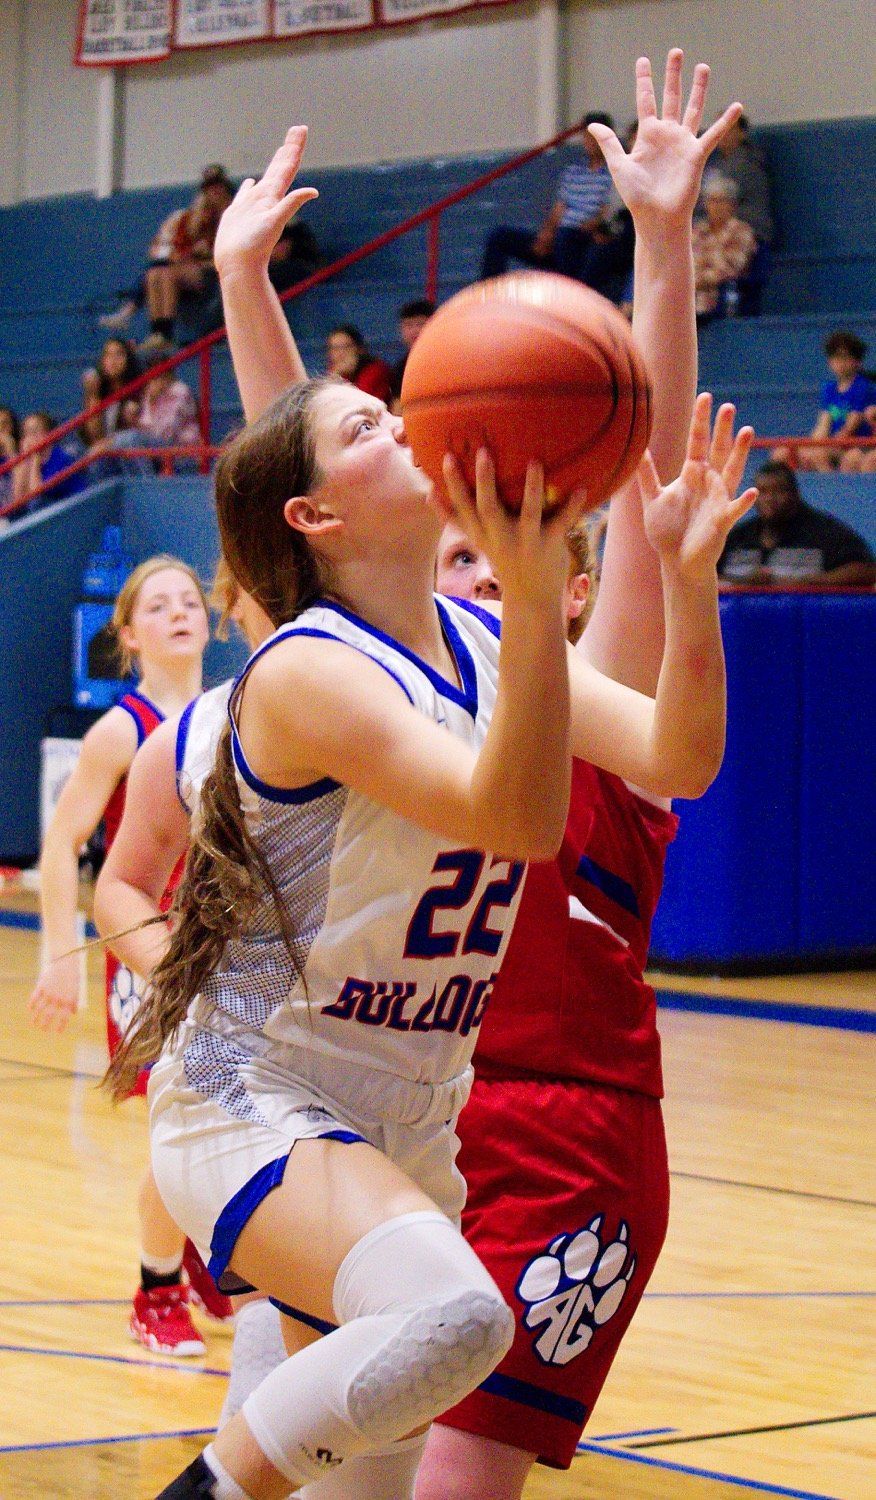 Madyson Pence drives past Kylie Kennedy for the layup. [see more shots]